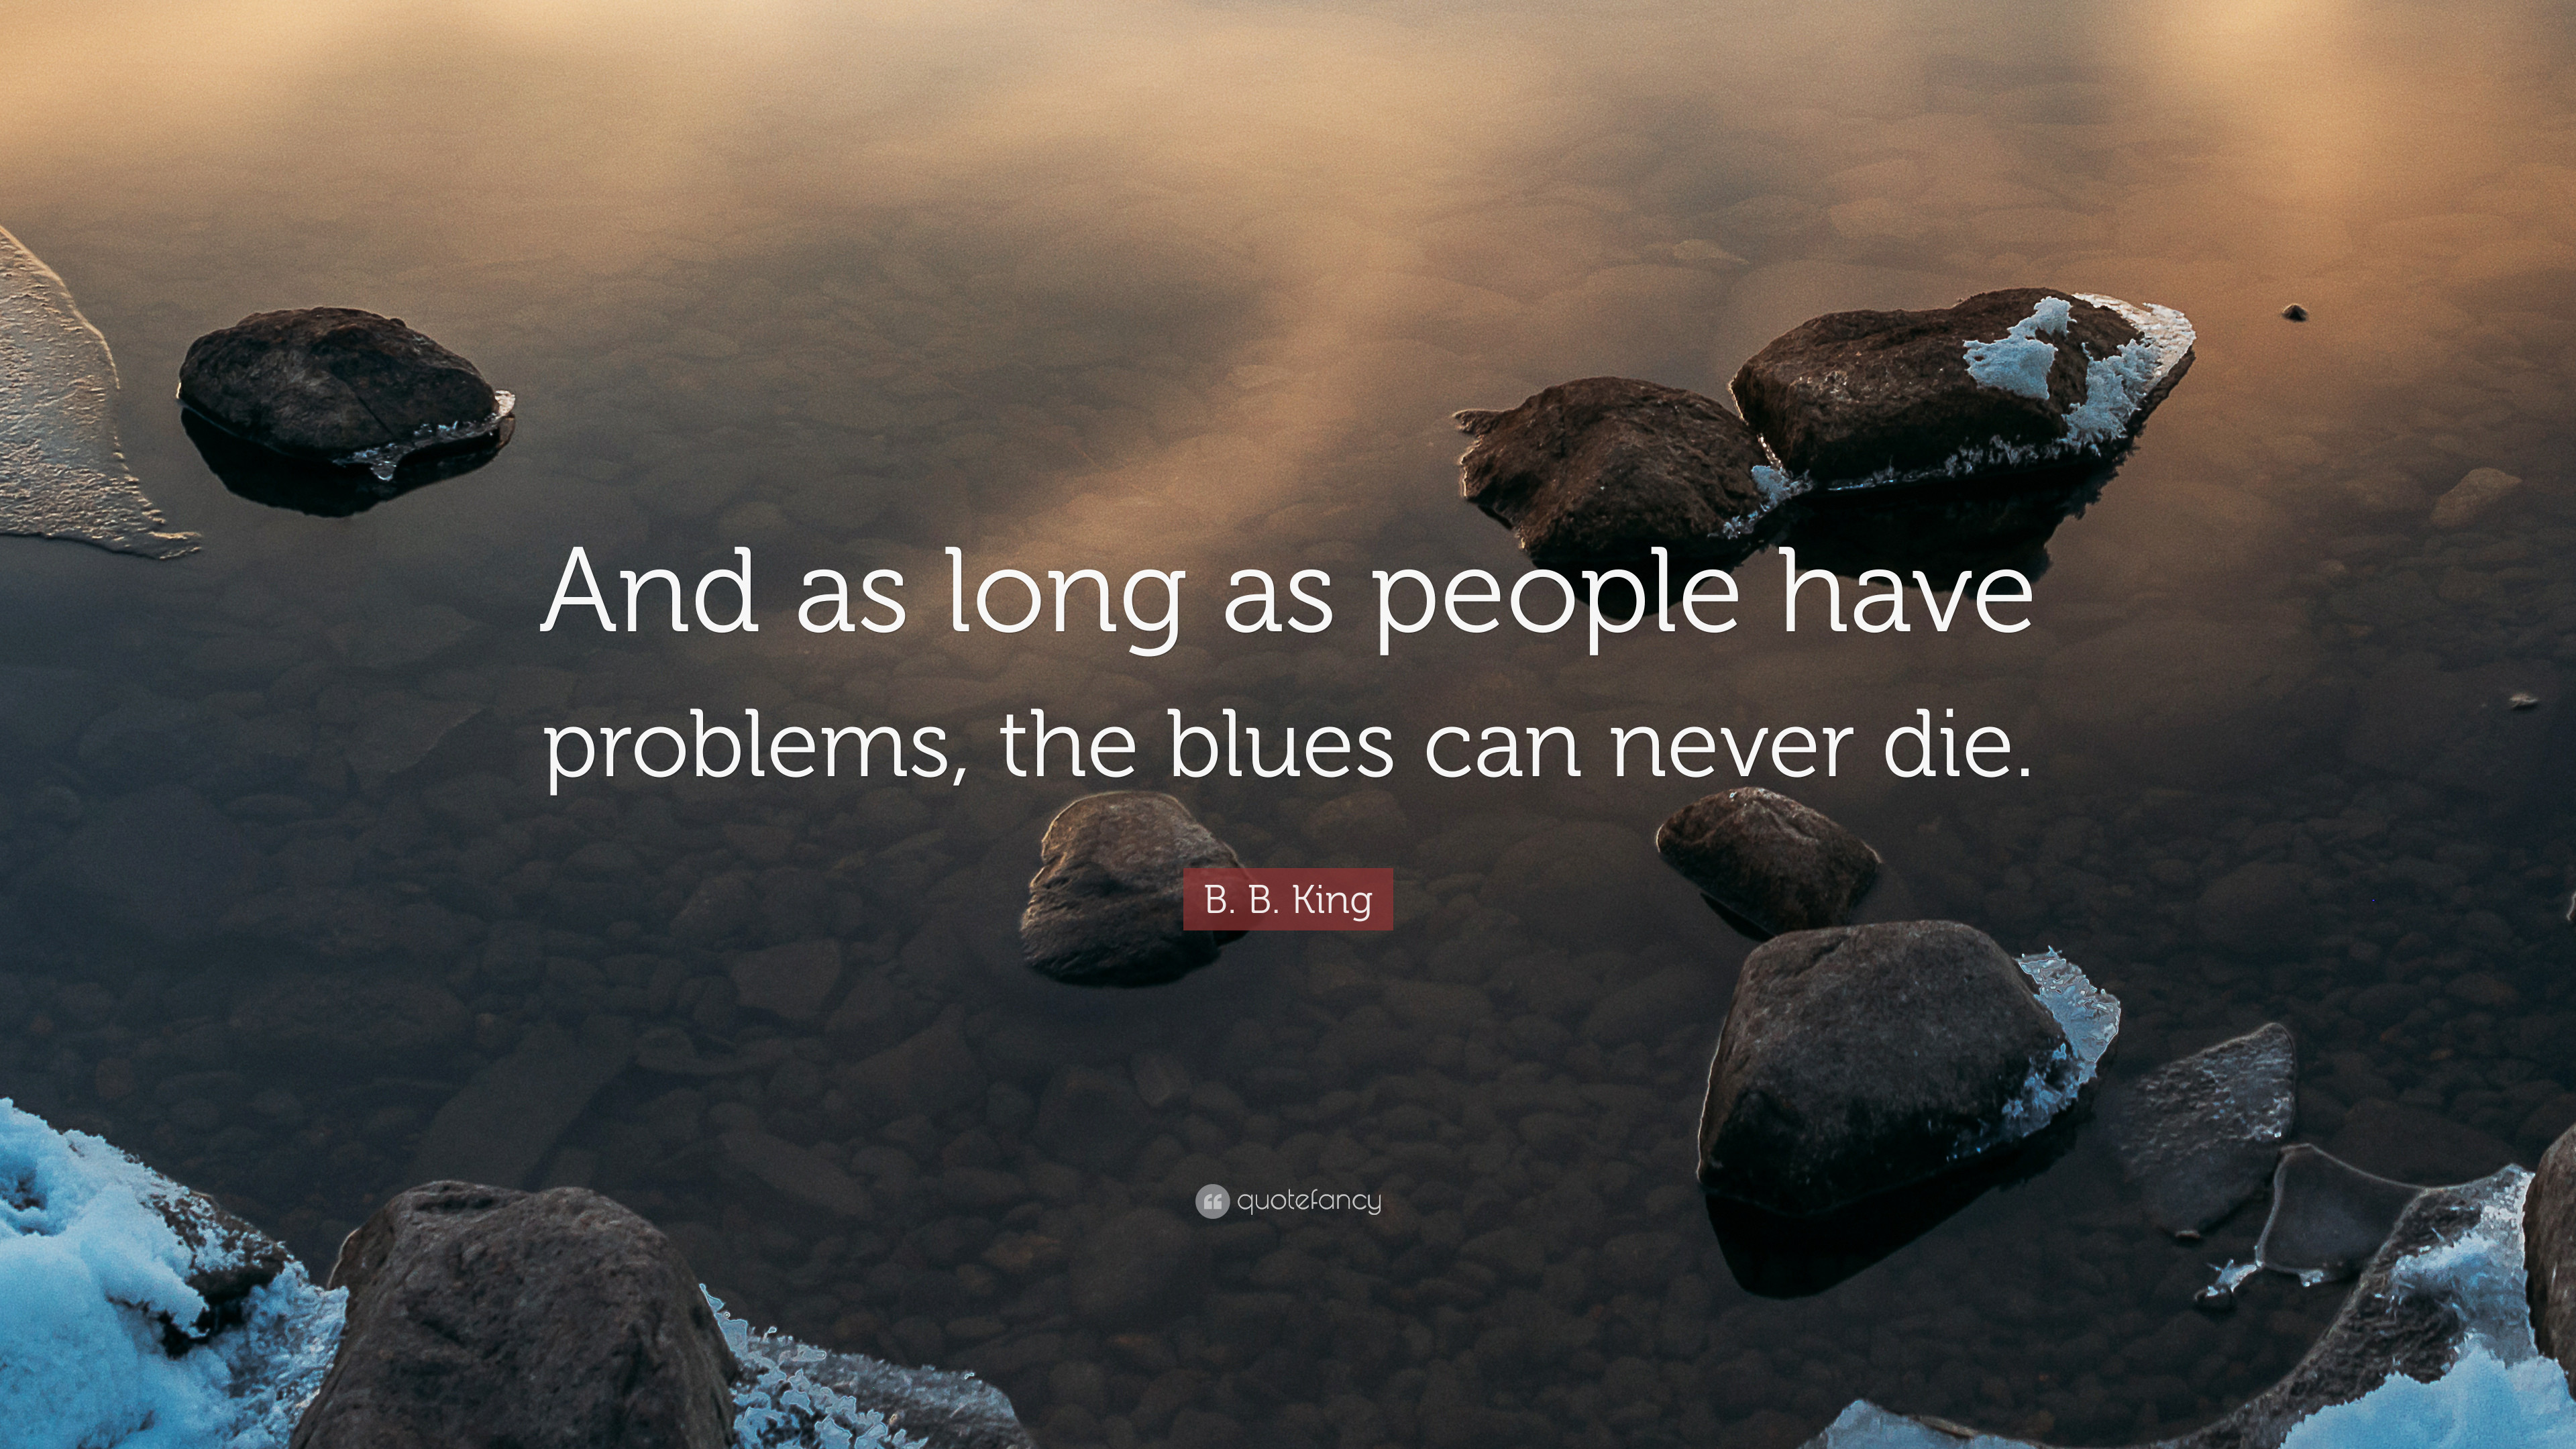 3840x2160 B. B. King Quote: “And as long as people have problems, the blues can